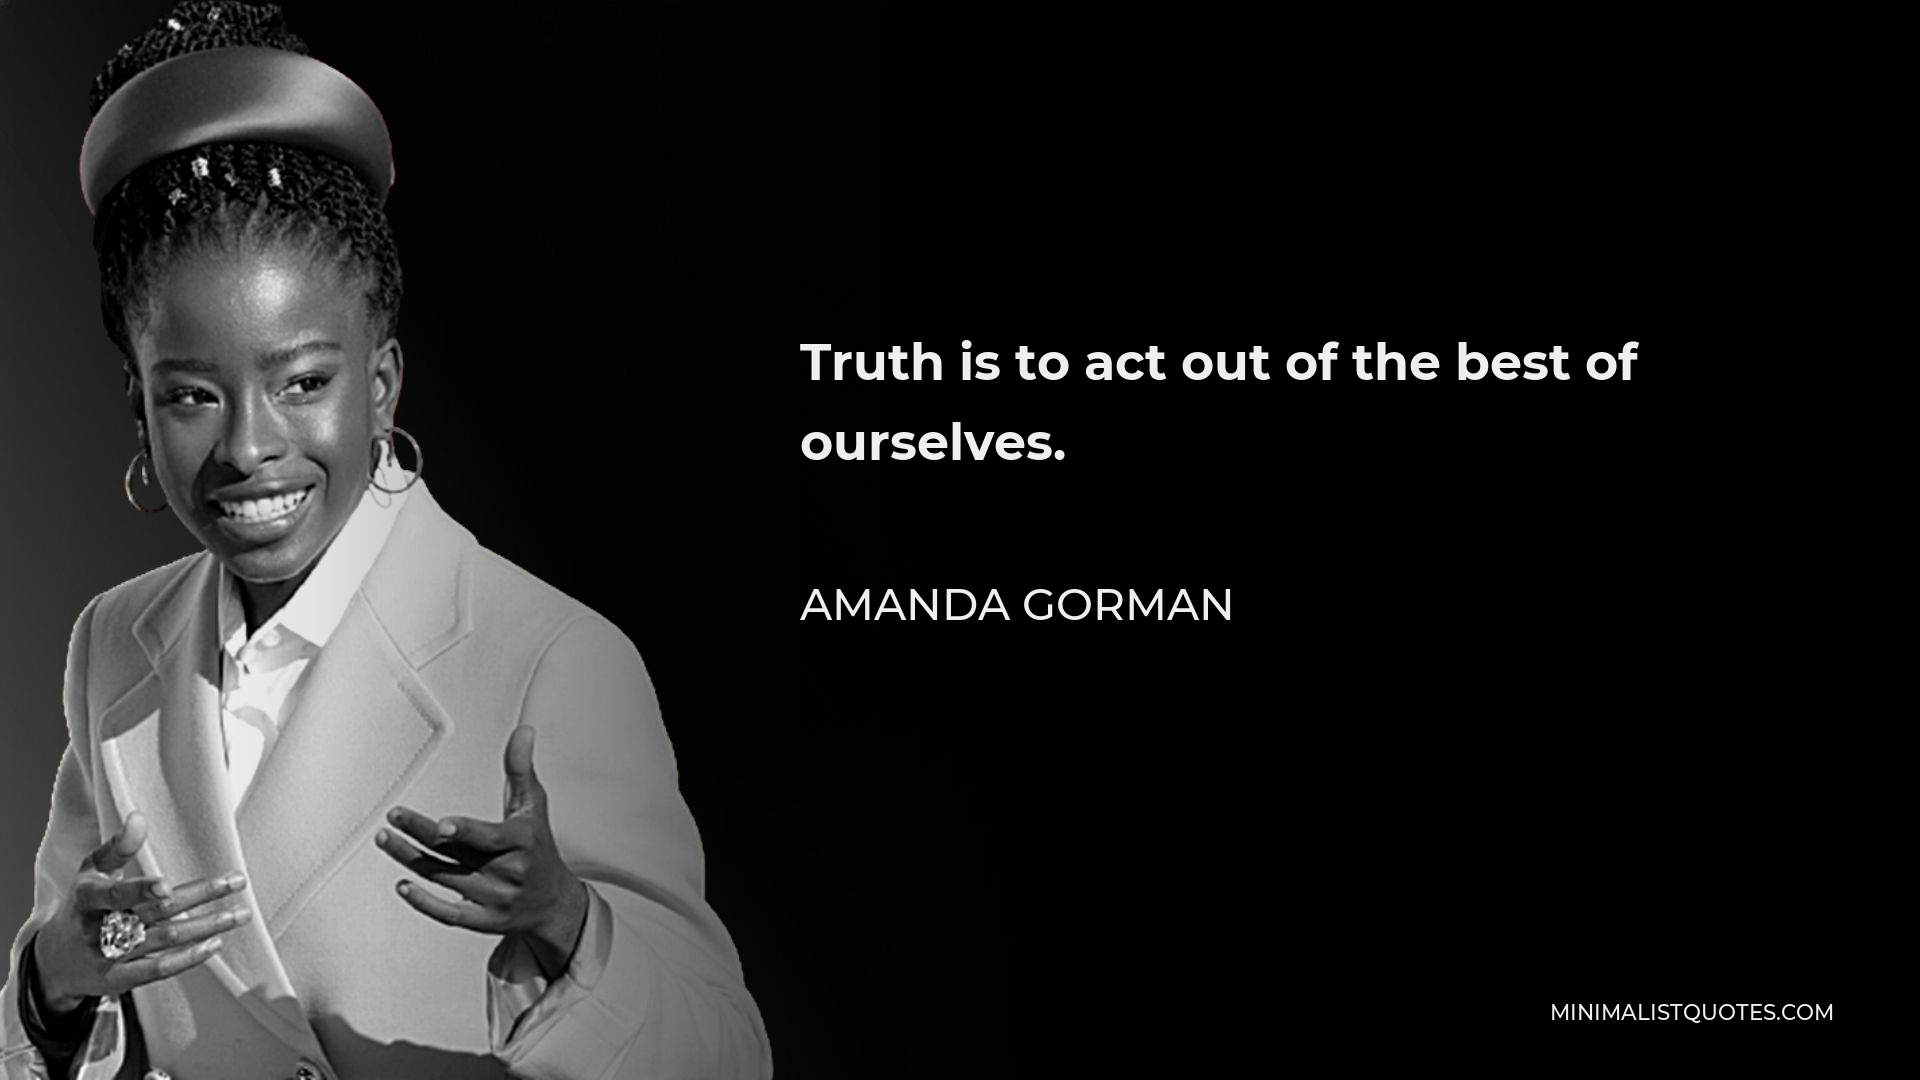 Amanda Gorman Quote - Truth is to act out of the best of ourselves.